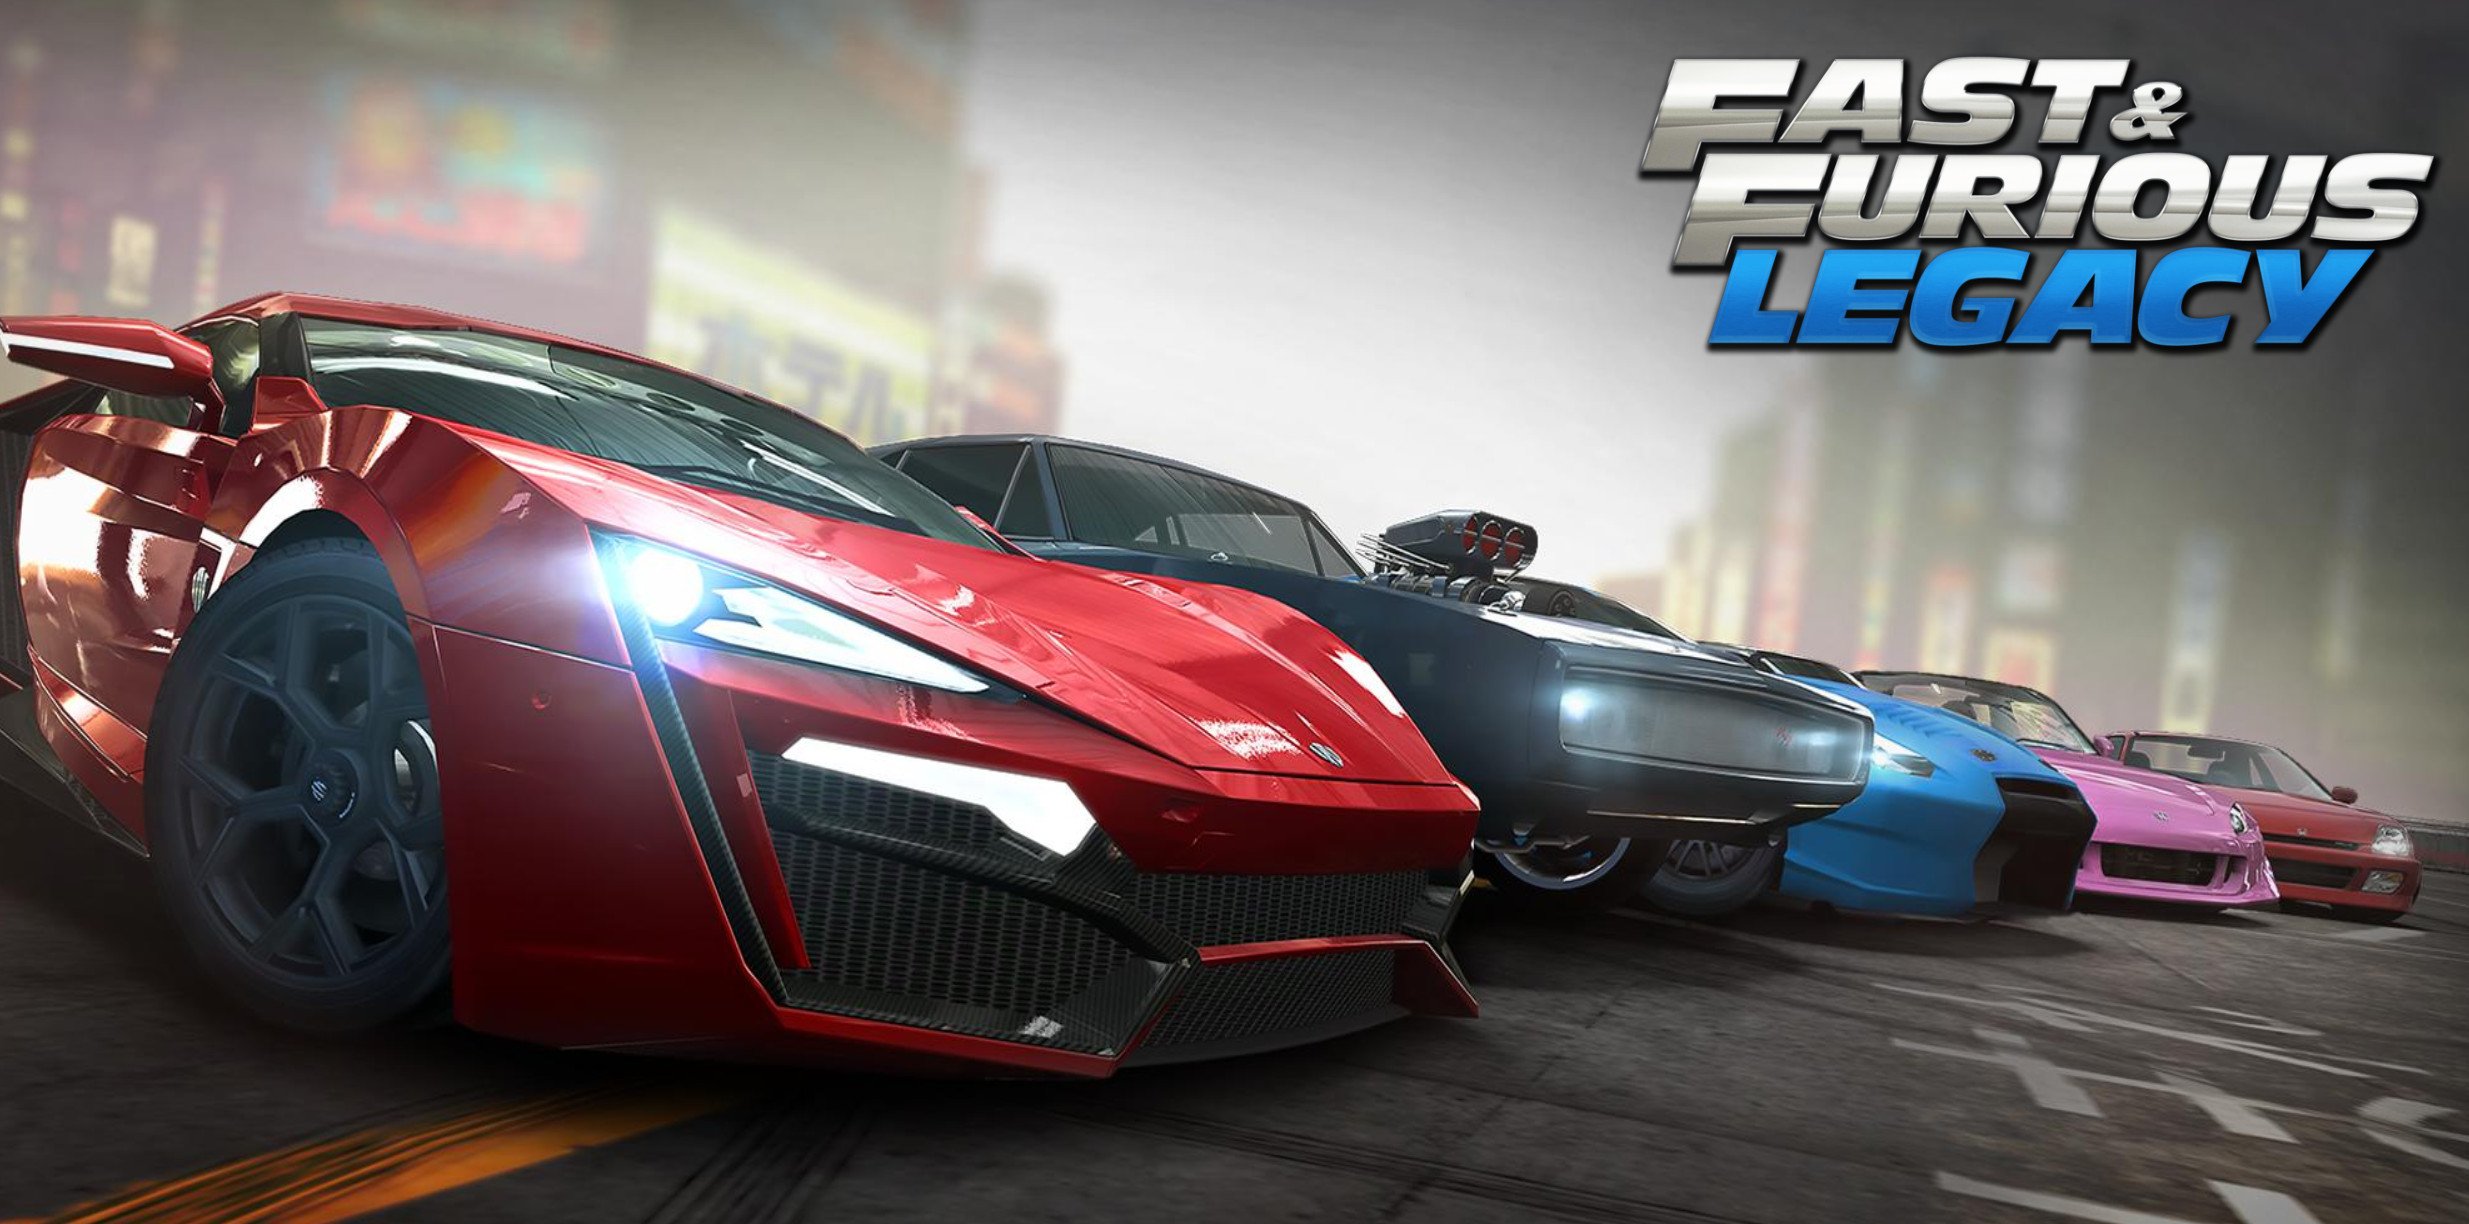  fast  Furious  Legacy Race  Racing  Action 1ffl 